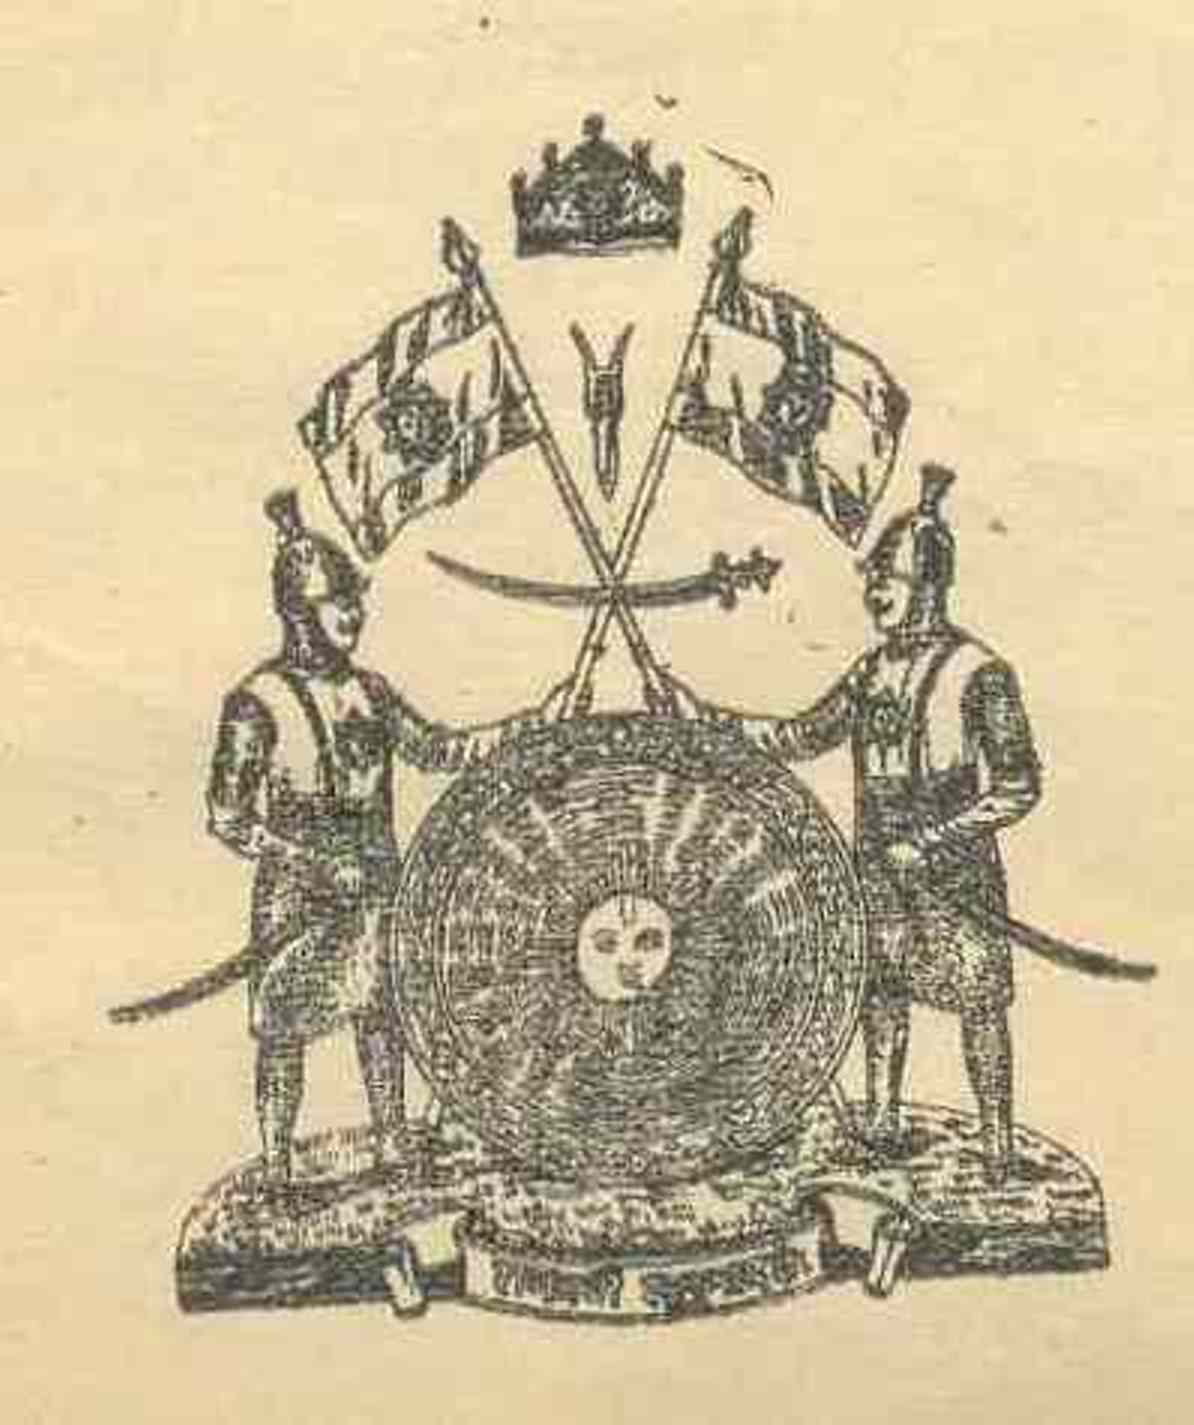 Seal of Maharaja Hari Singh on the cover of the Civil List